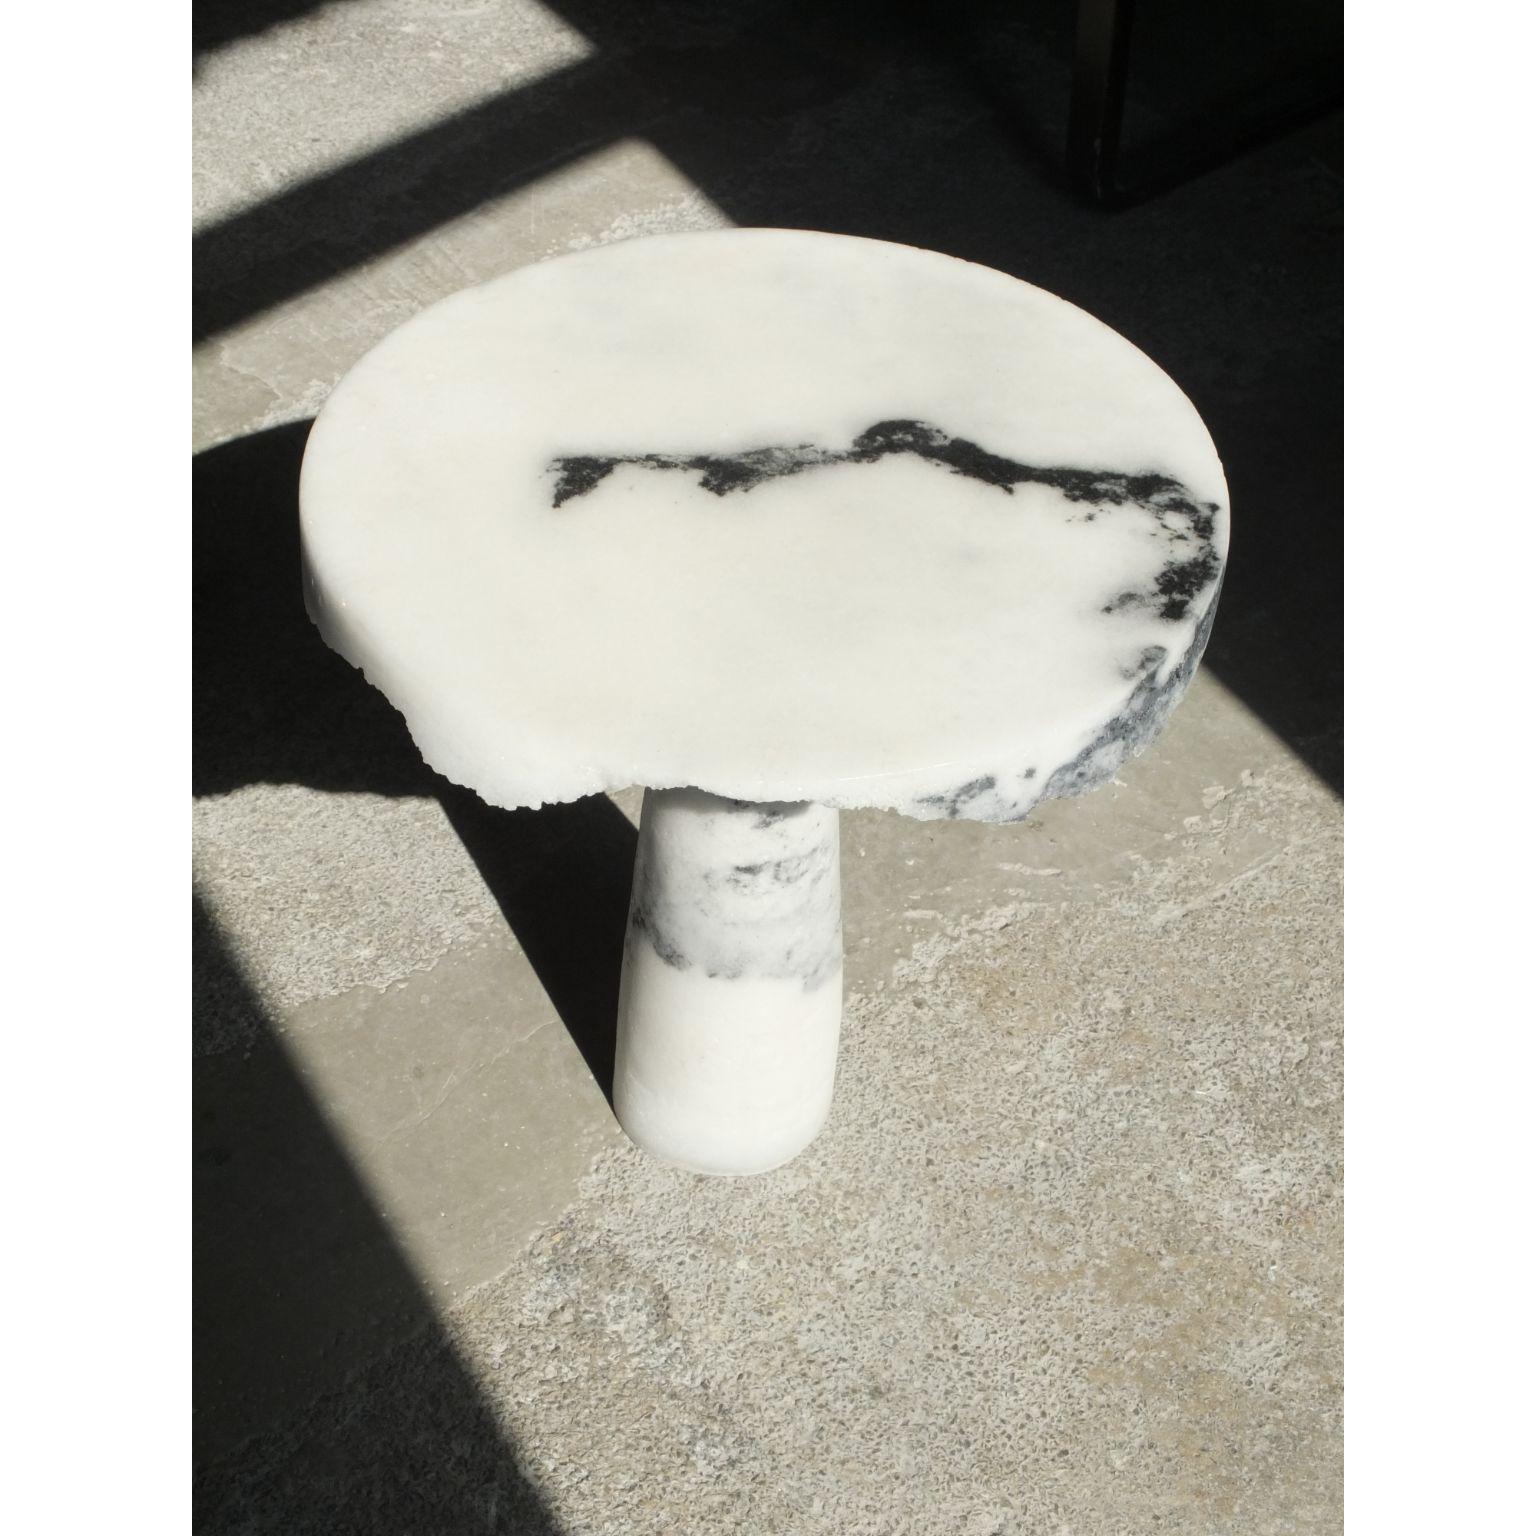 Marble salt side table by Roxane Lahidji
Dimensions: D 50 x H 45 cm.
Materials: Marble Salt.
Weight: 25 kg.

Roxane Lahidji is a social designer specializing in ecological material developments and applications. Her research focuses on